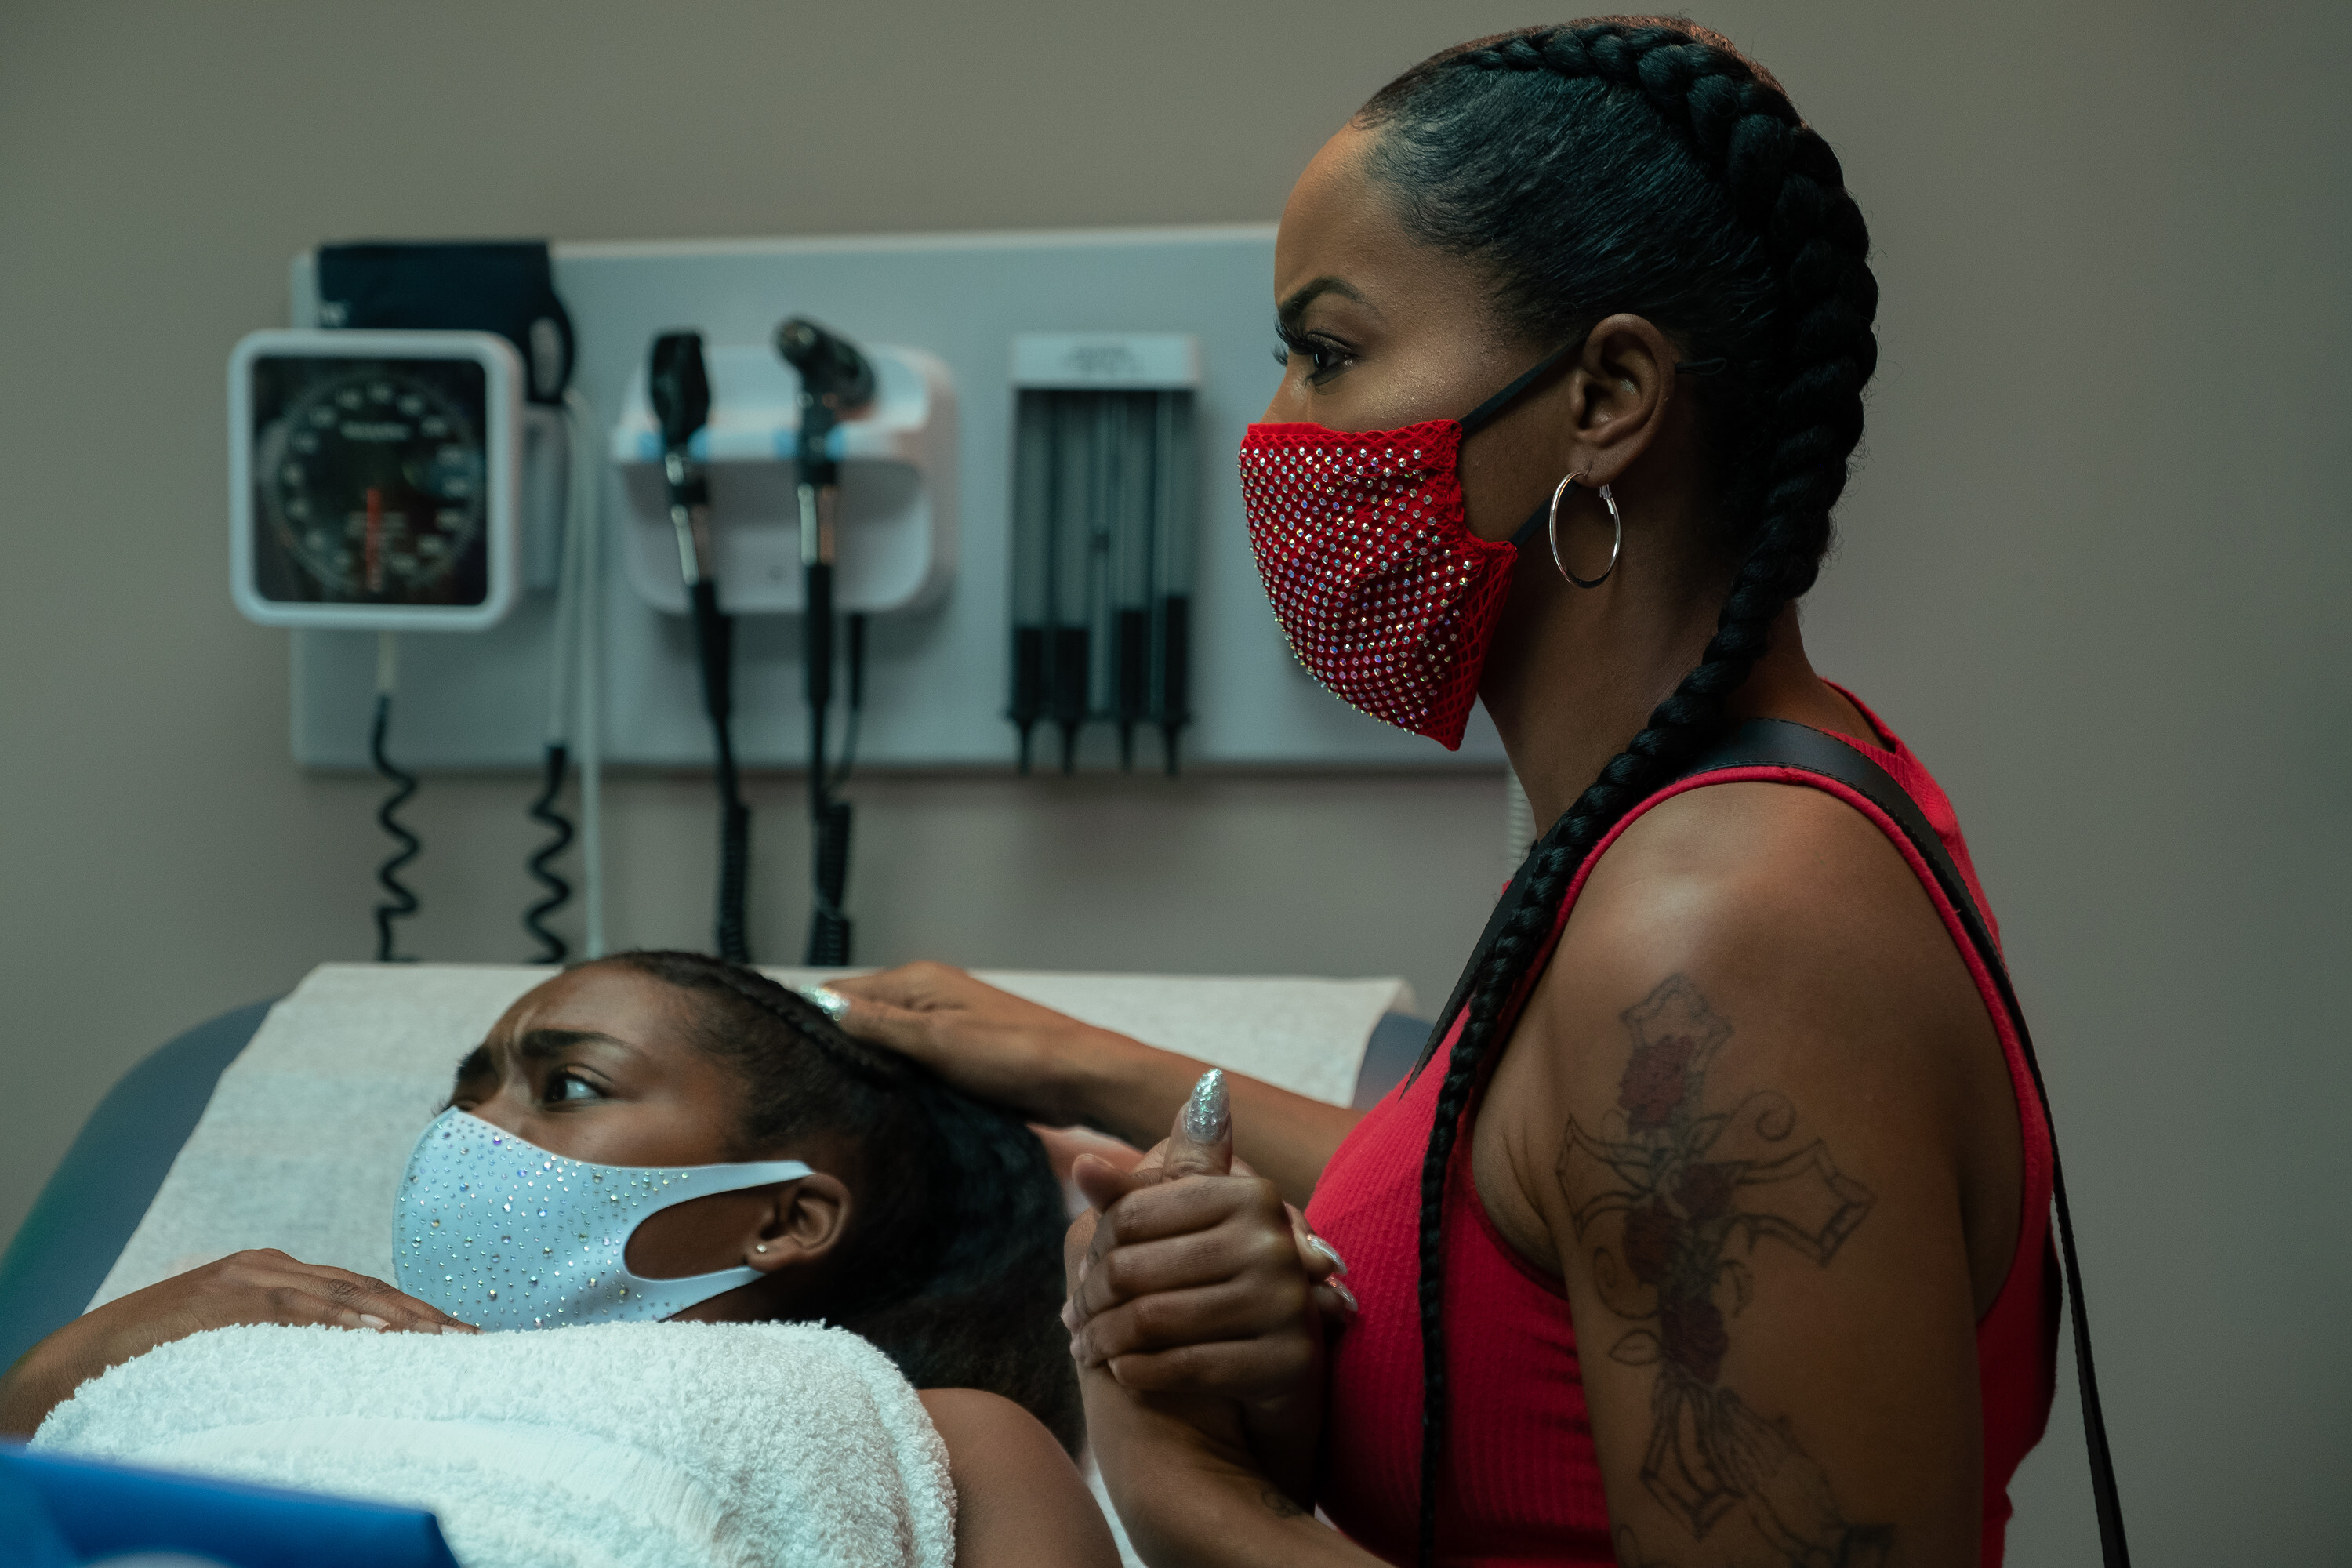 Mercedes (right, played by Brandee Evans) accompanies her daughter Terricka to get an ultrasound at the abortion clinic on "P-Valley."